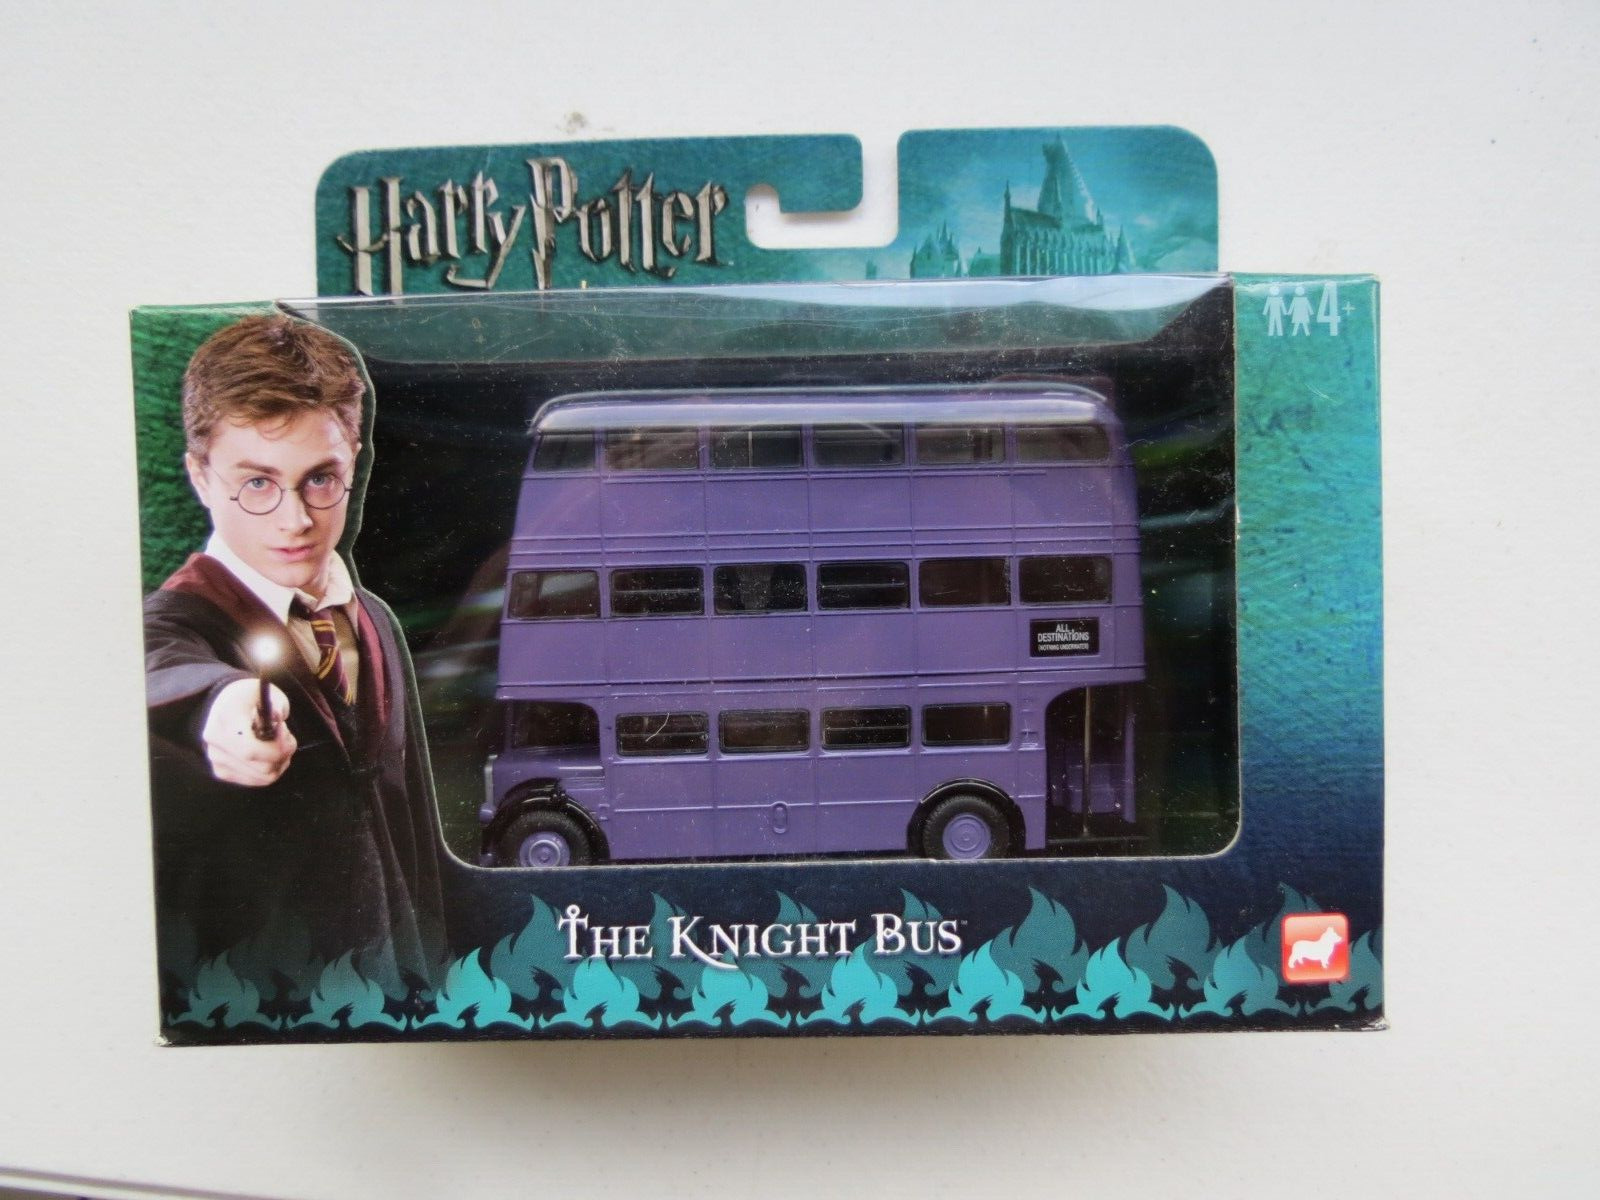 Harry Potter THE KNIGHT BUS Die-Cast Metal Collectable NEW Corgi US SELLER